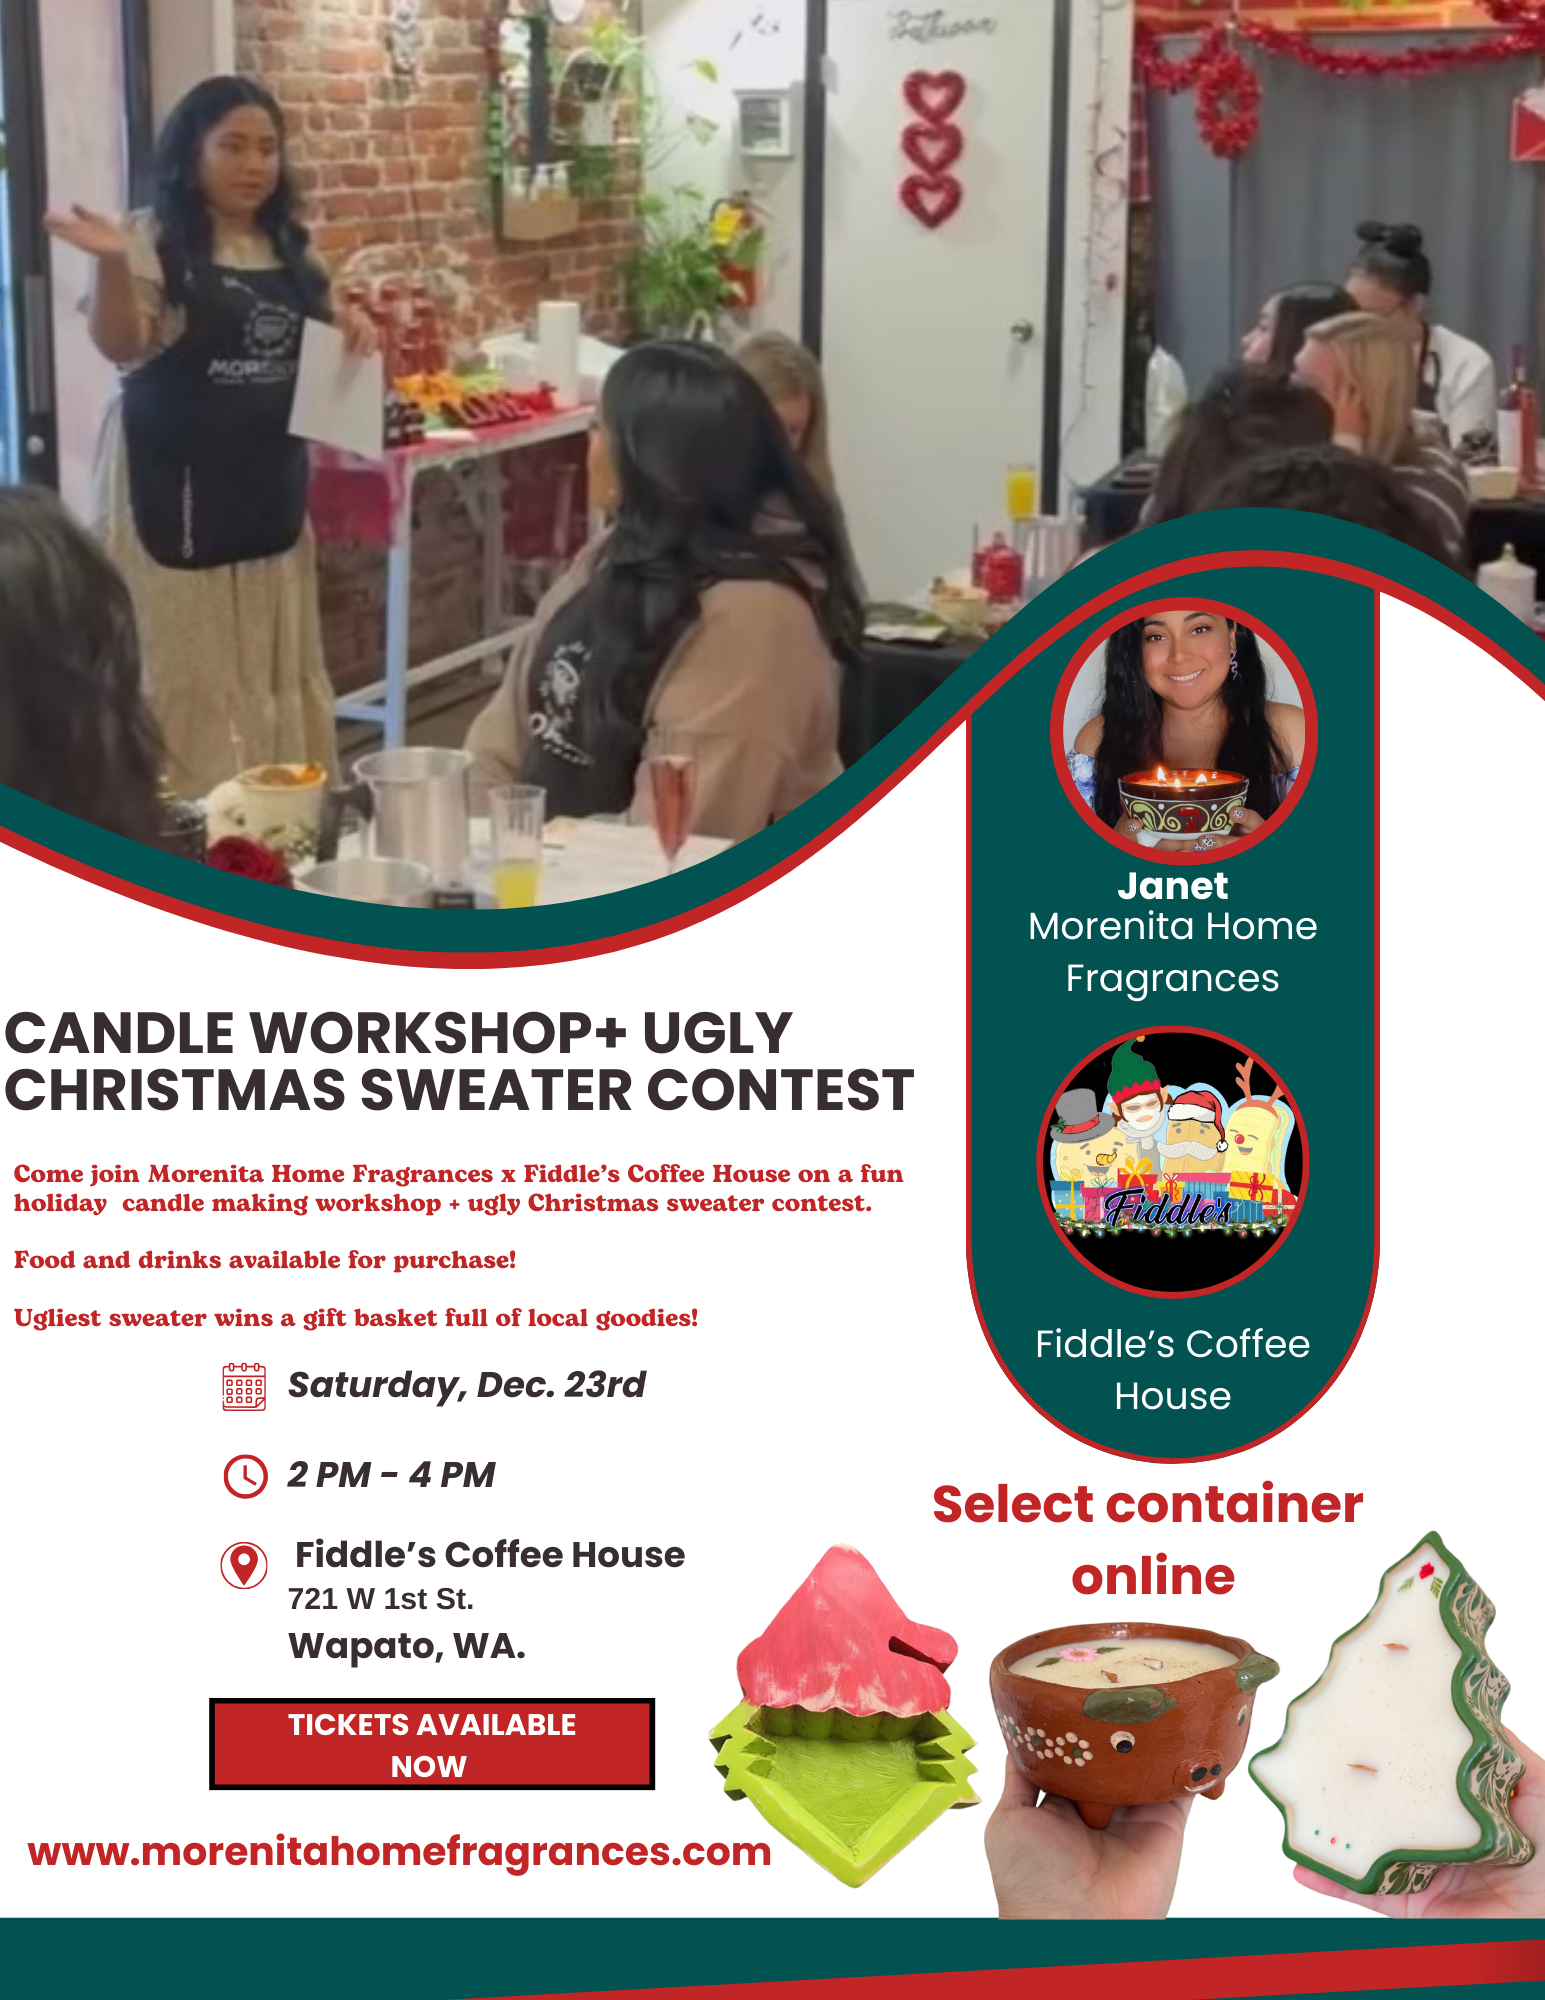 Fiddle's Coffee House Candle Workshop + Ugly Christmas Sweater Contest